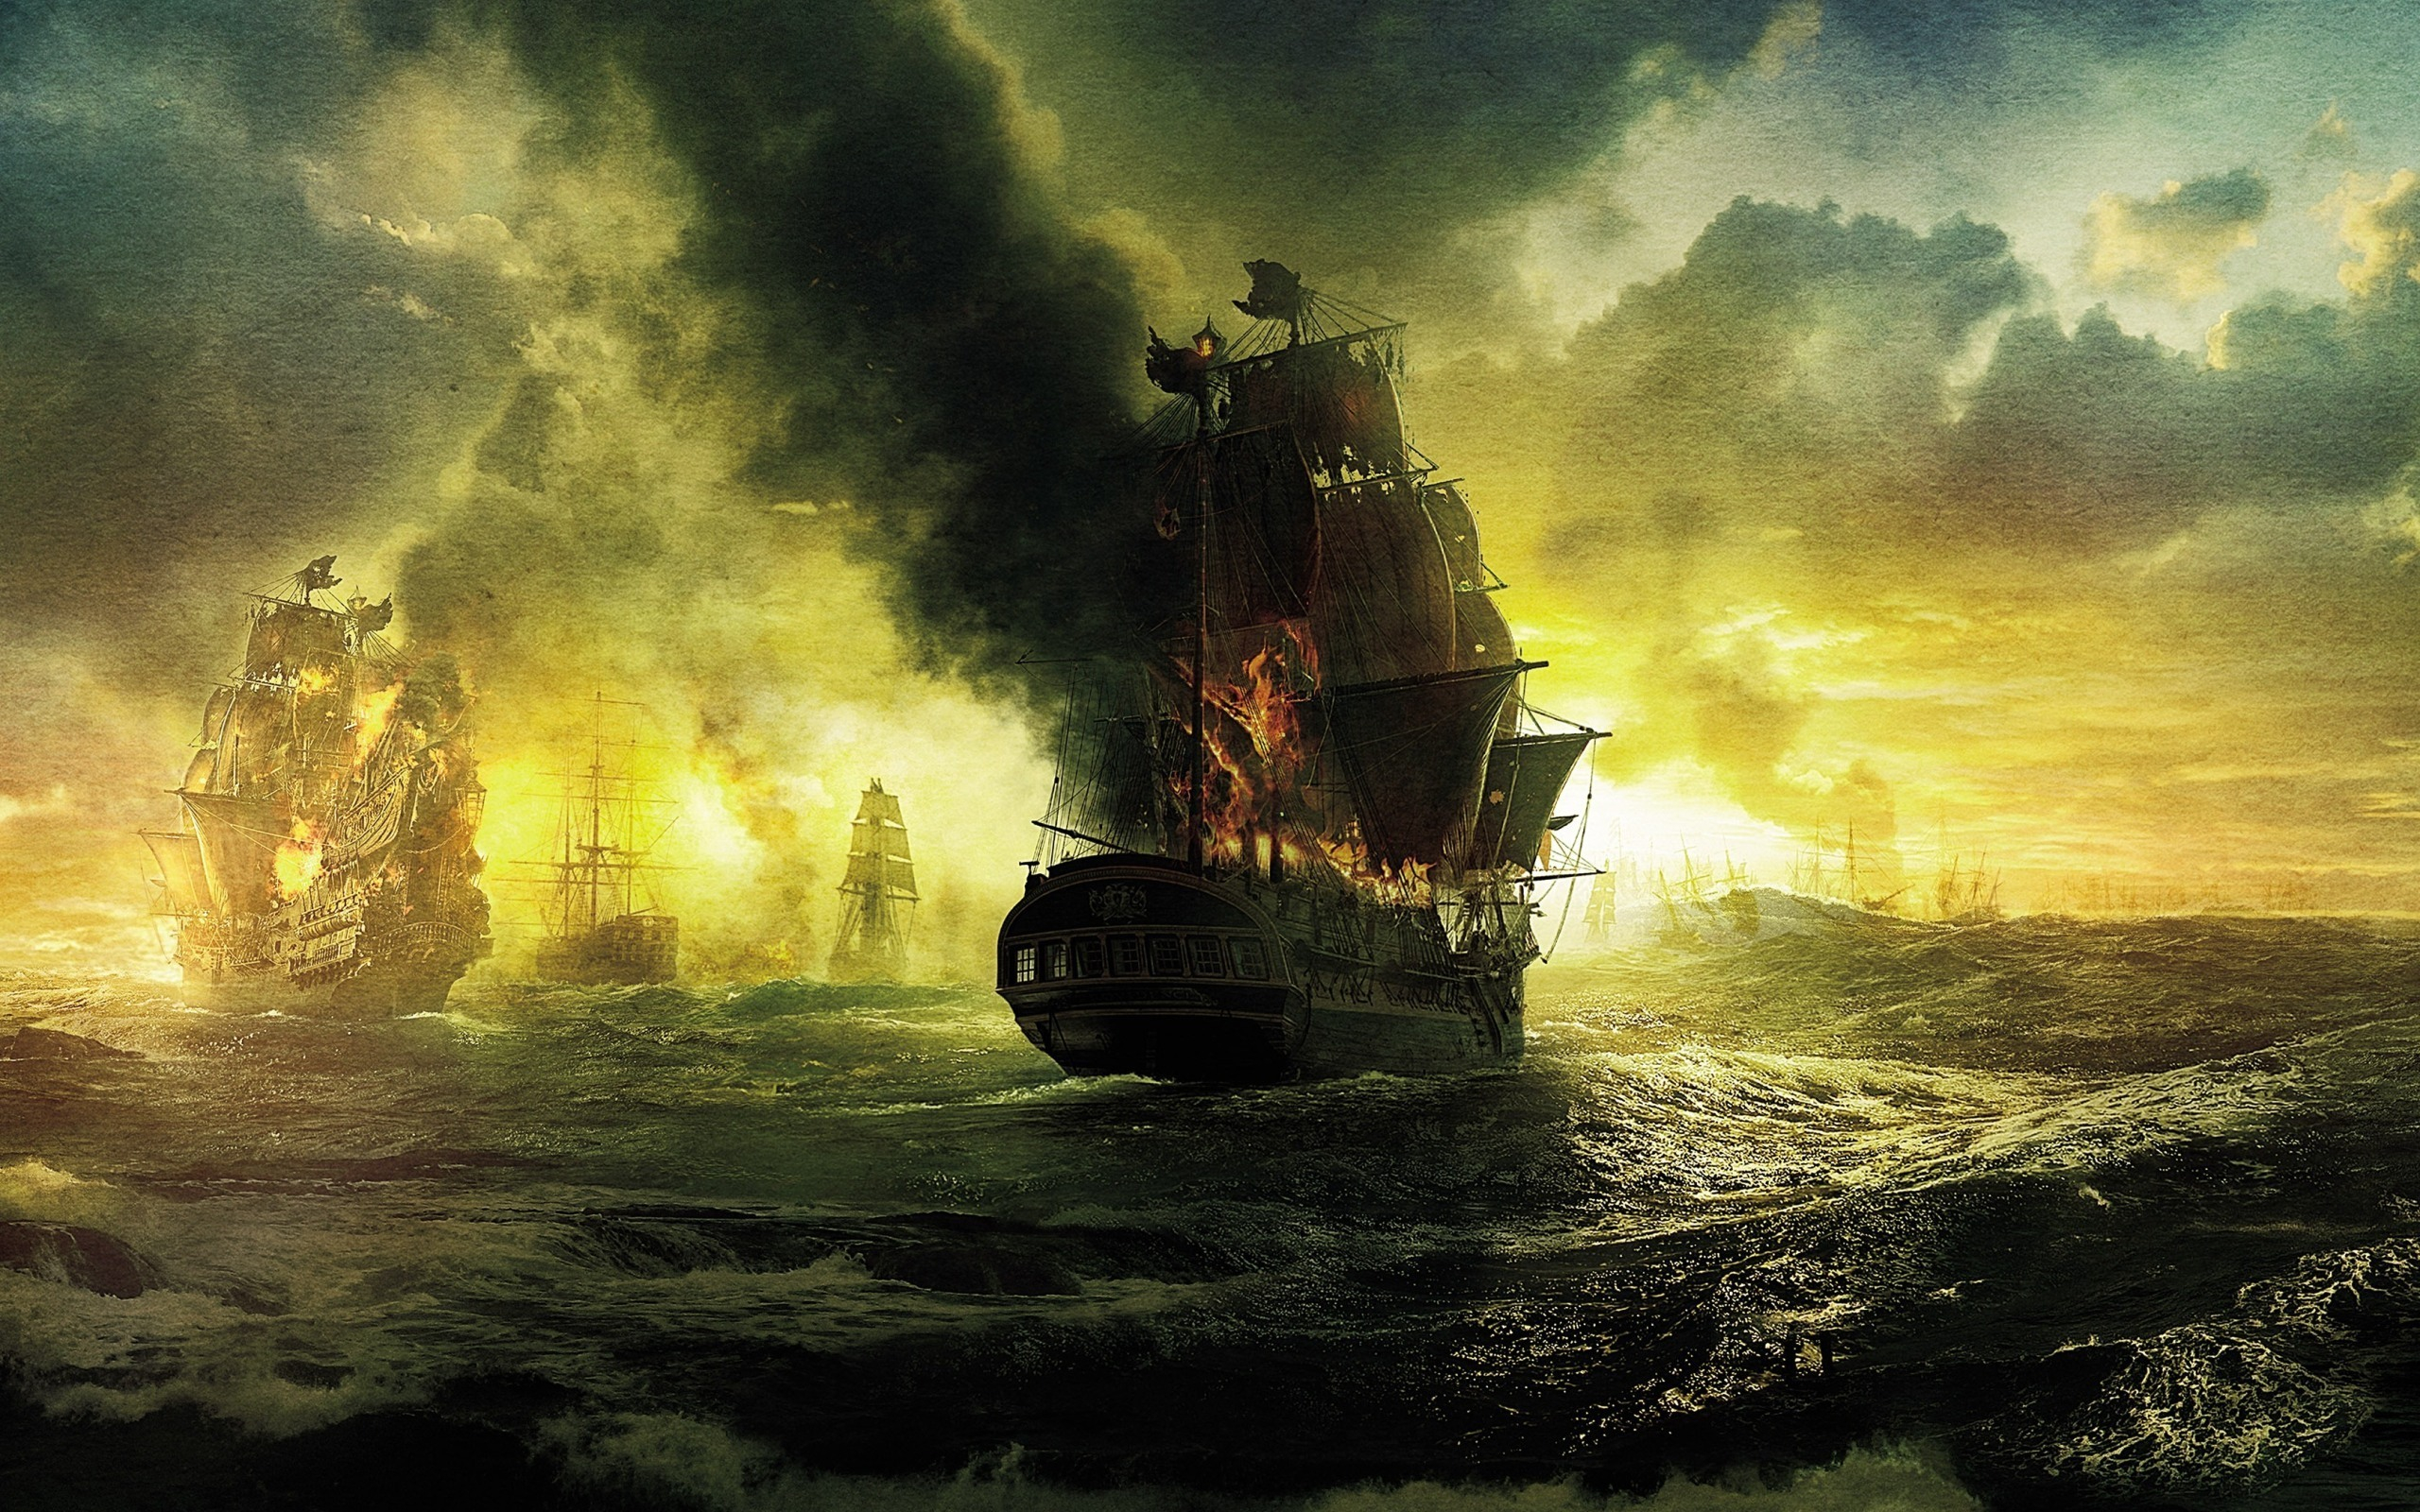 2560x1600 Pirates of the Caribbean: On Stranger Tides HD Wallpaper